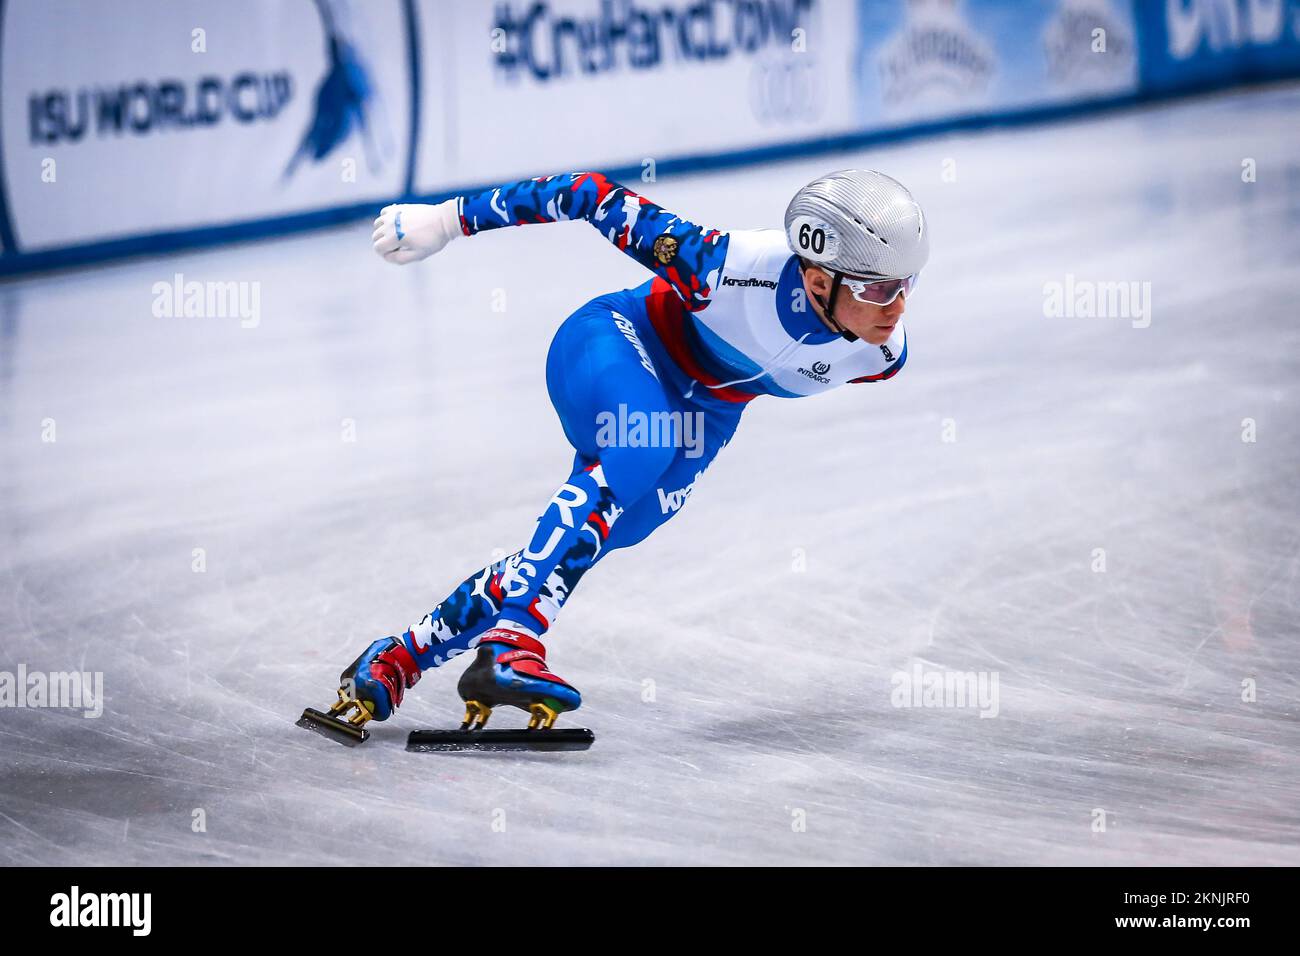 Dresden, Germany, February 03, 2019: male speed skater Alexander Shulginov of Russia competes during the ISU Short Track Speed Skating Stock Photo